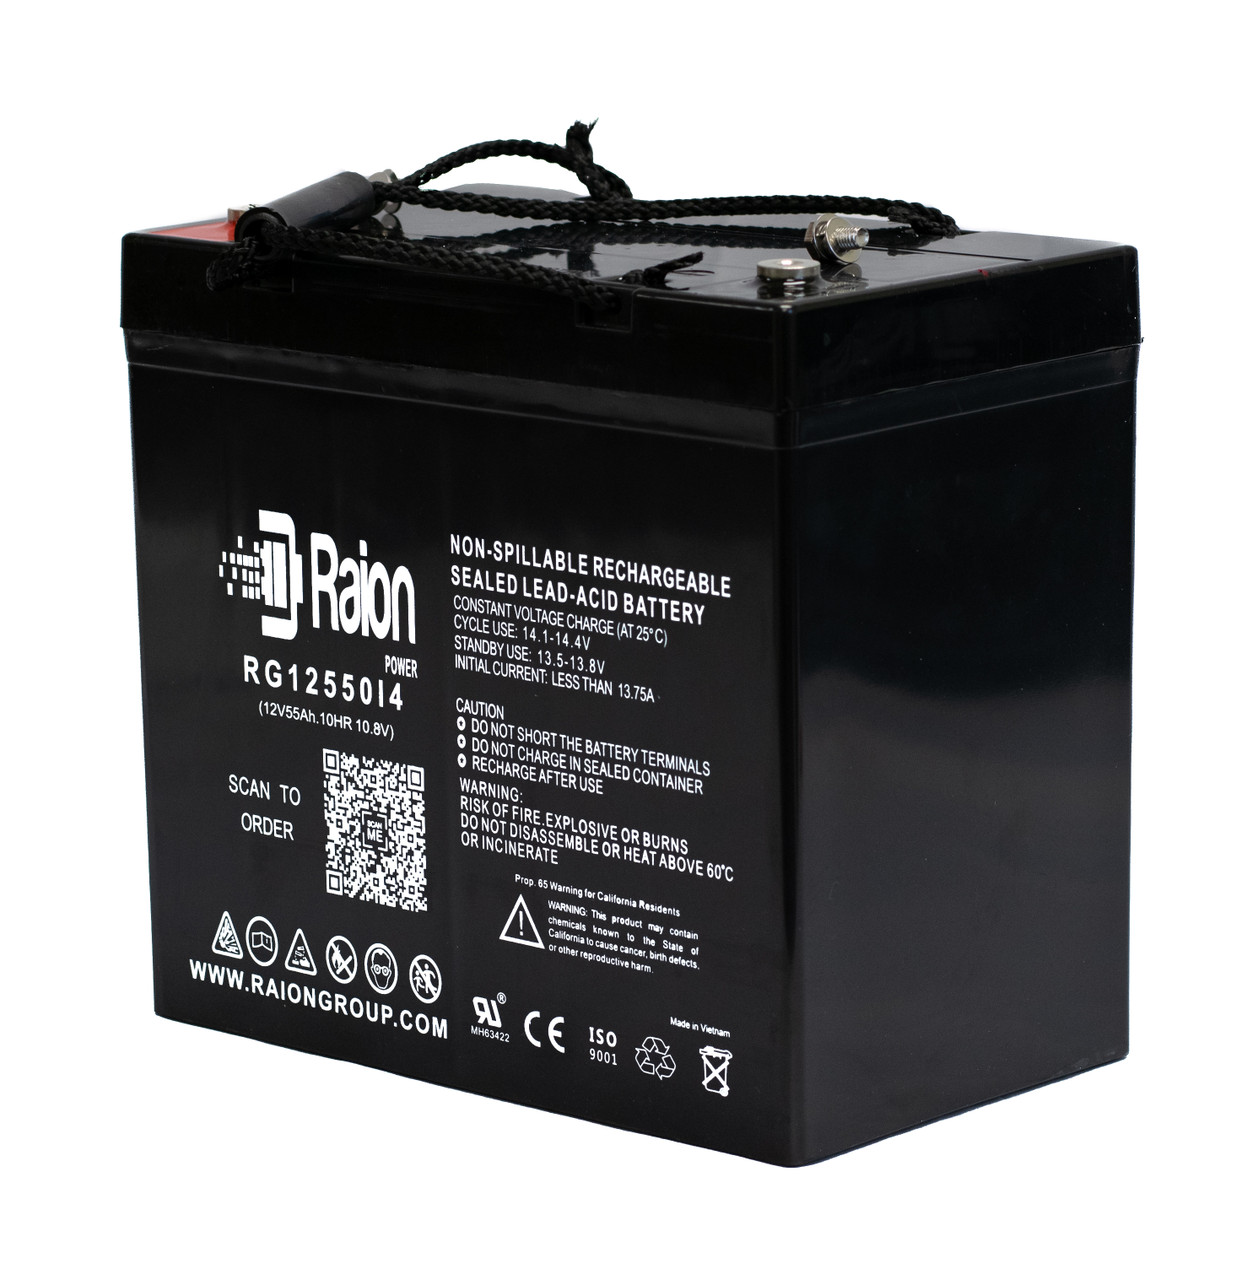 Raion Power Replacement 12V 55Ah Battery for MHB MM50-12 - 1 Pack